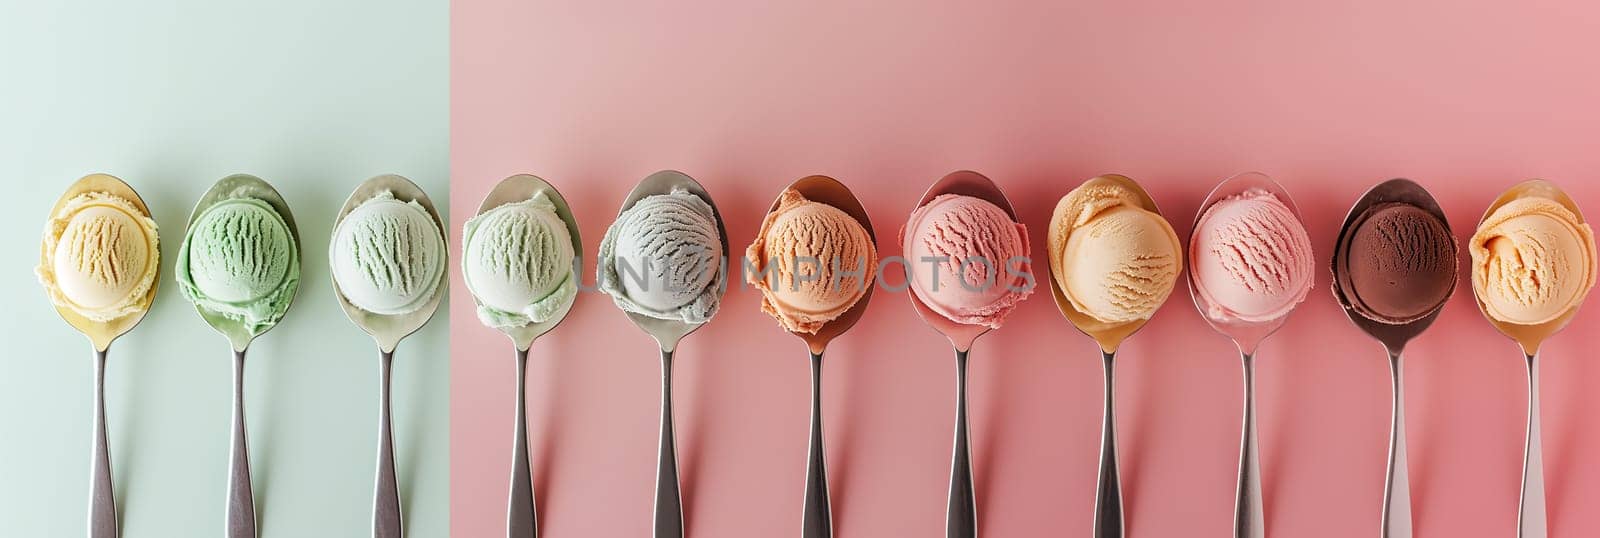 Row of different ice cream flavor scoops on colored background by Hype2art